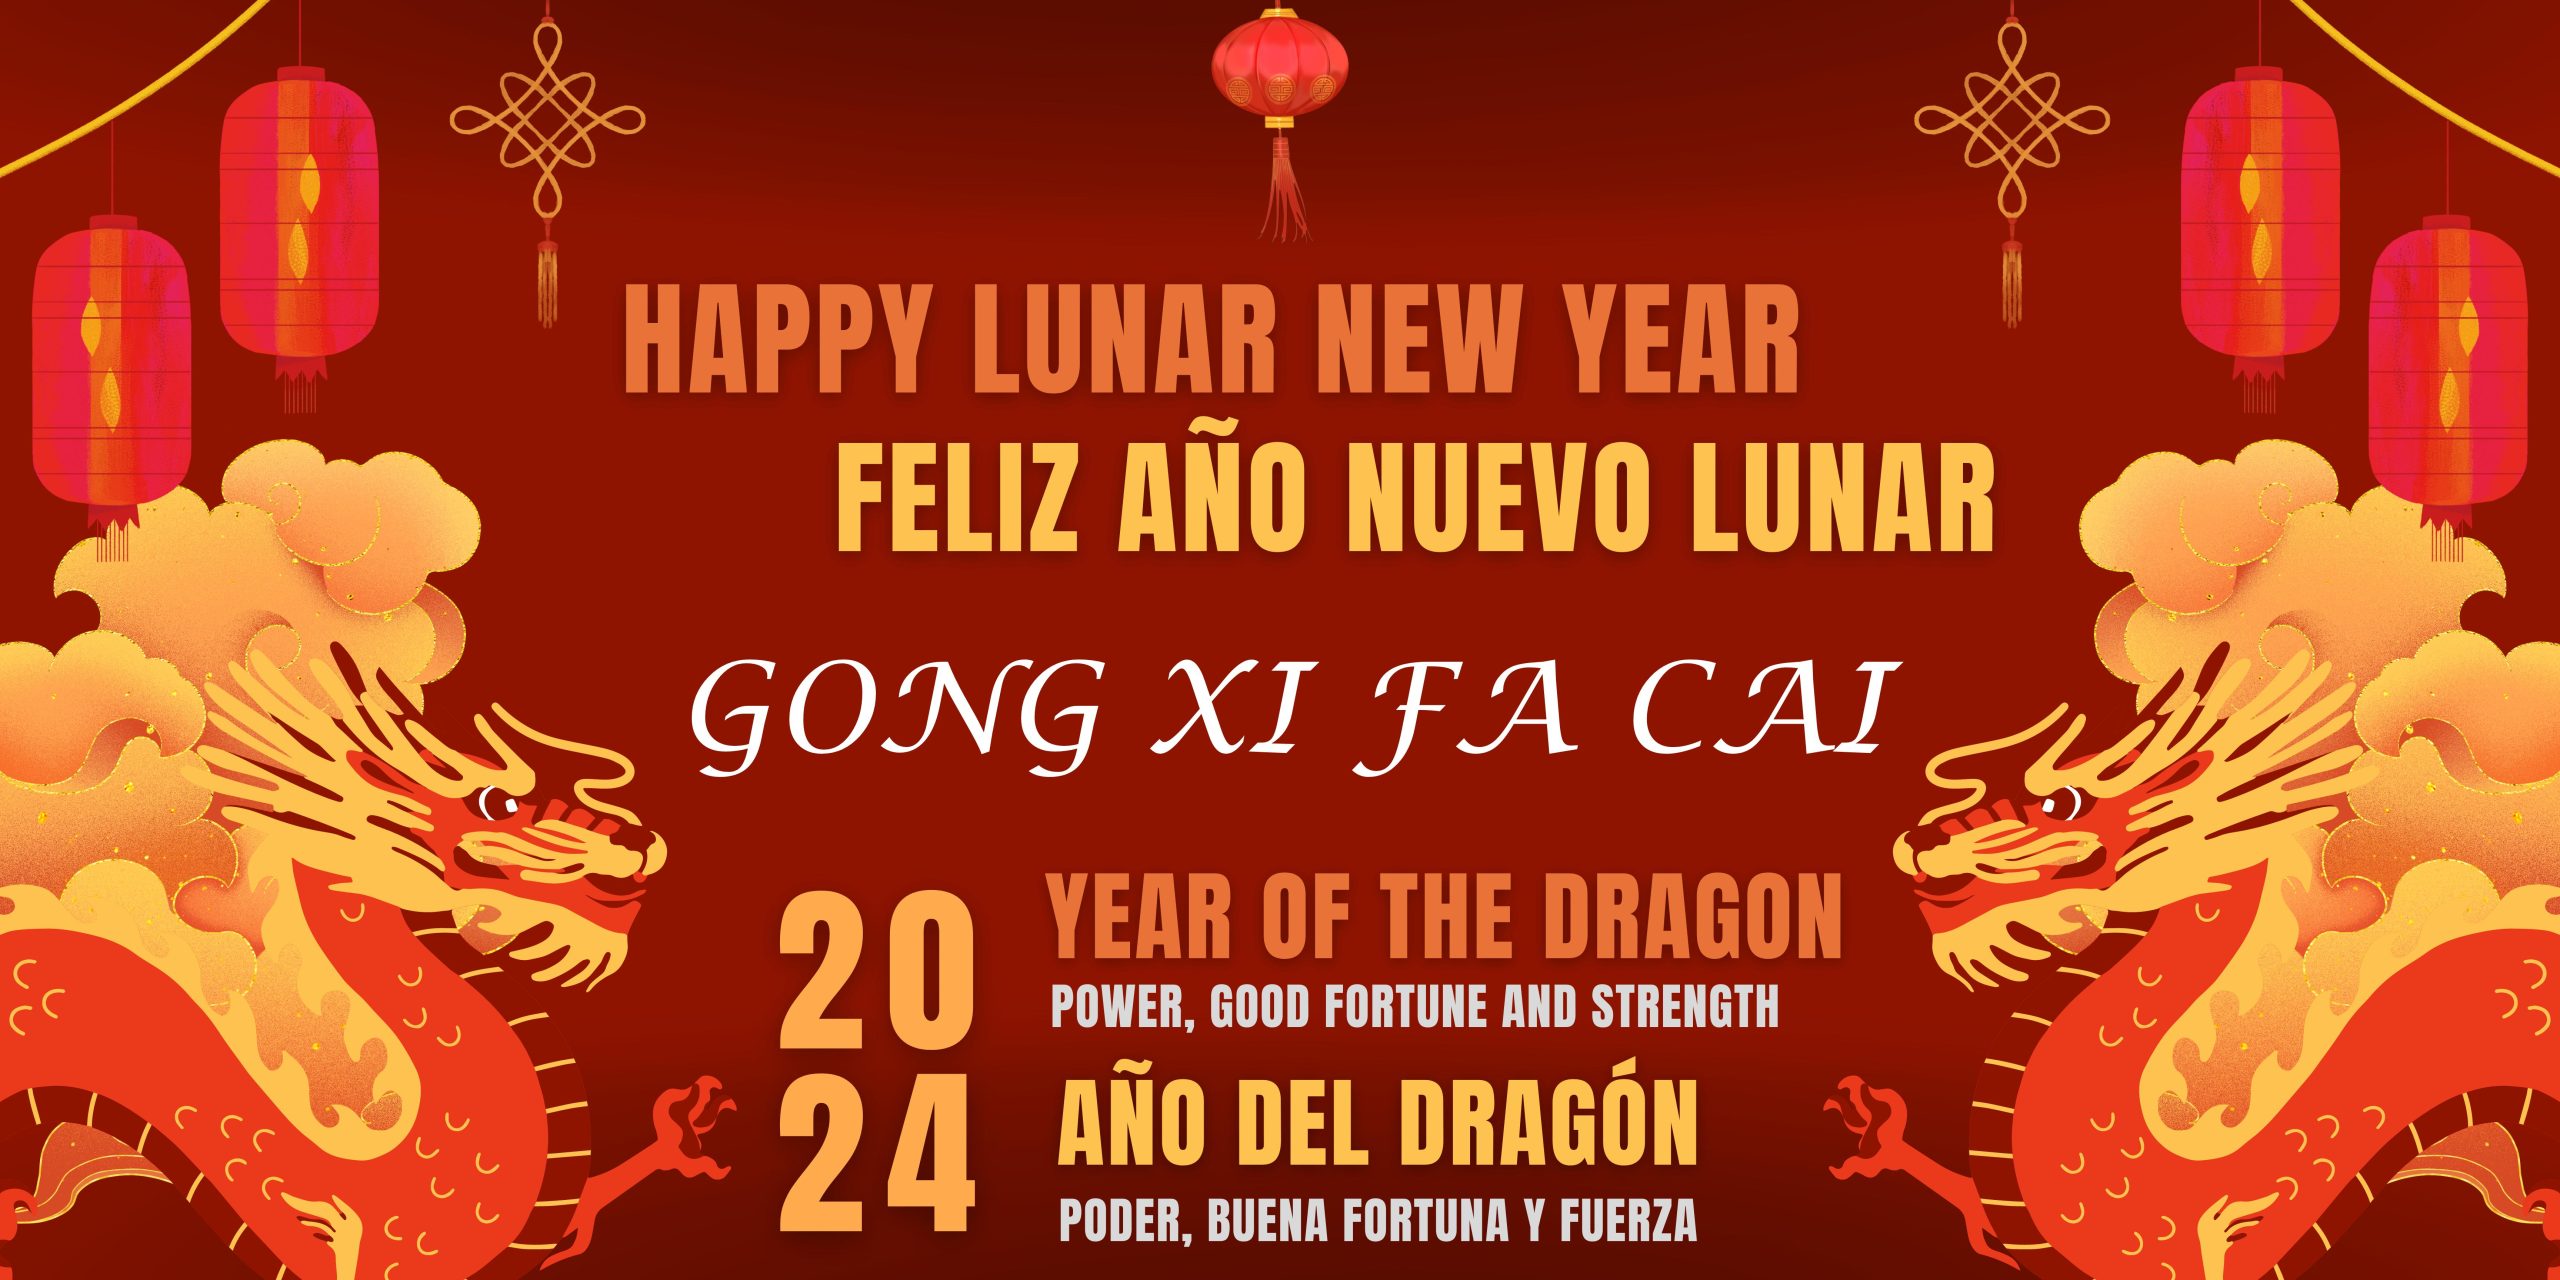 Dark red background with graphics of yellow dragons on right and left sides. Red Chinese lanterns hang from the top. Yellow text says, "Happy Lunar New Year. Feliz Año Nuevo Lunar. Gong Xi Fa Cai. 2024 Year of the Dragon, Power, Good Fortune and Strength. Año del Dragón, Poder, Buena Fortuna y Fuerzo."